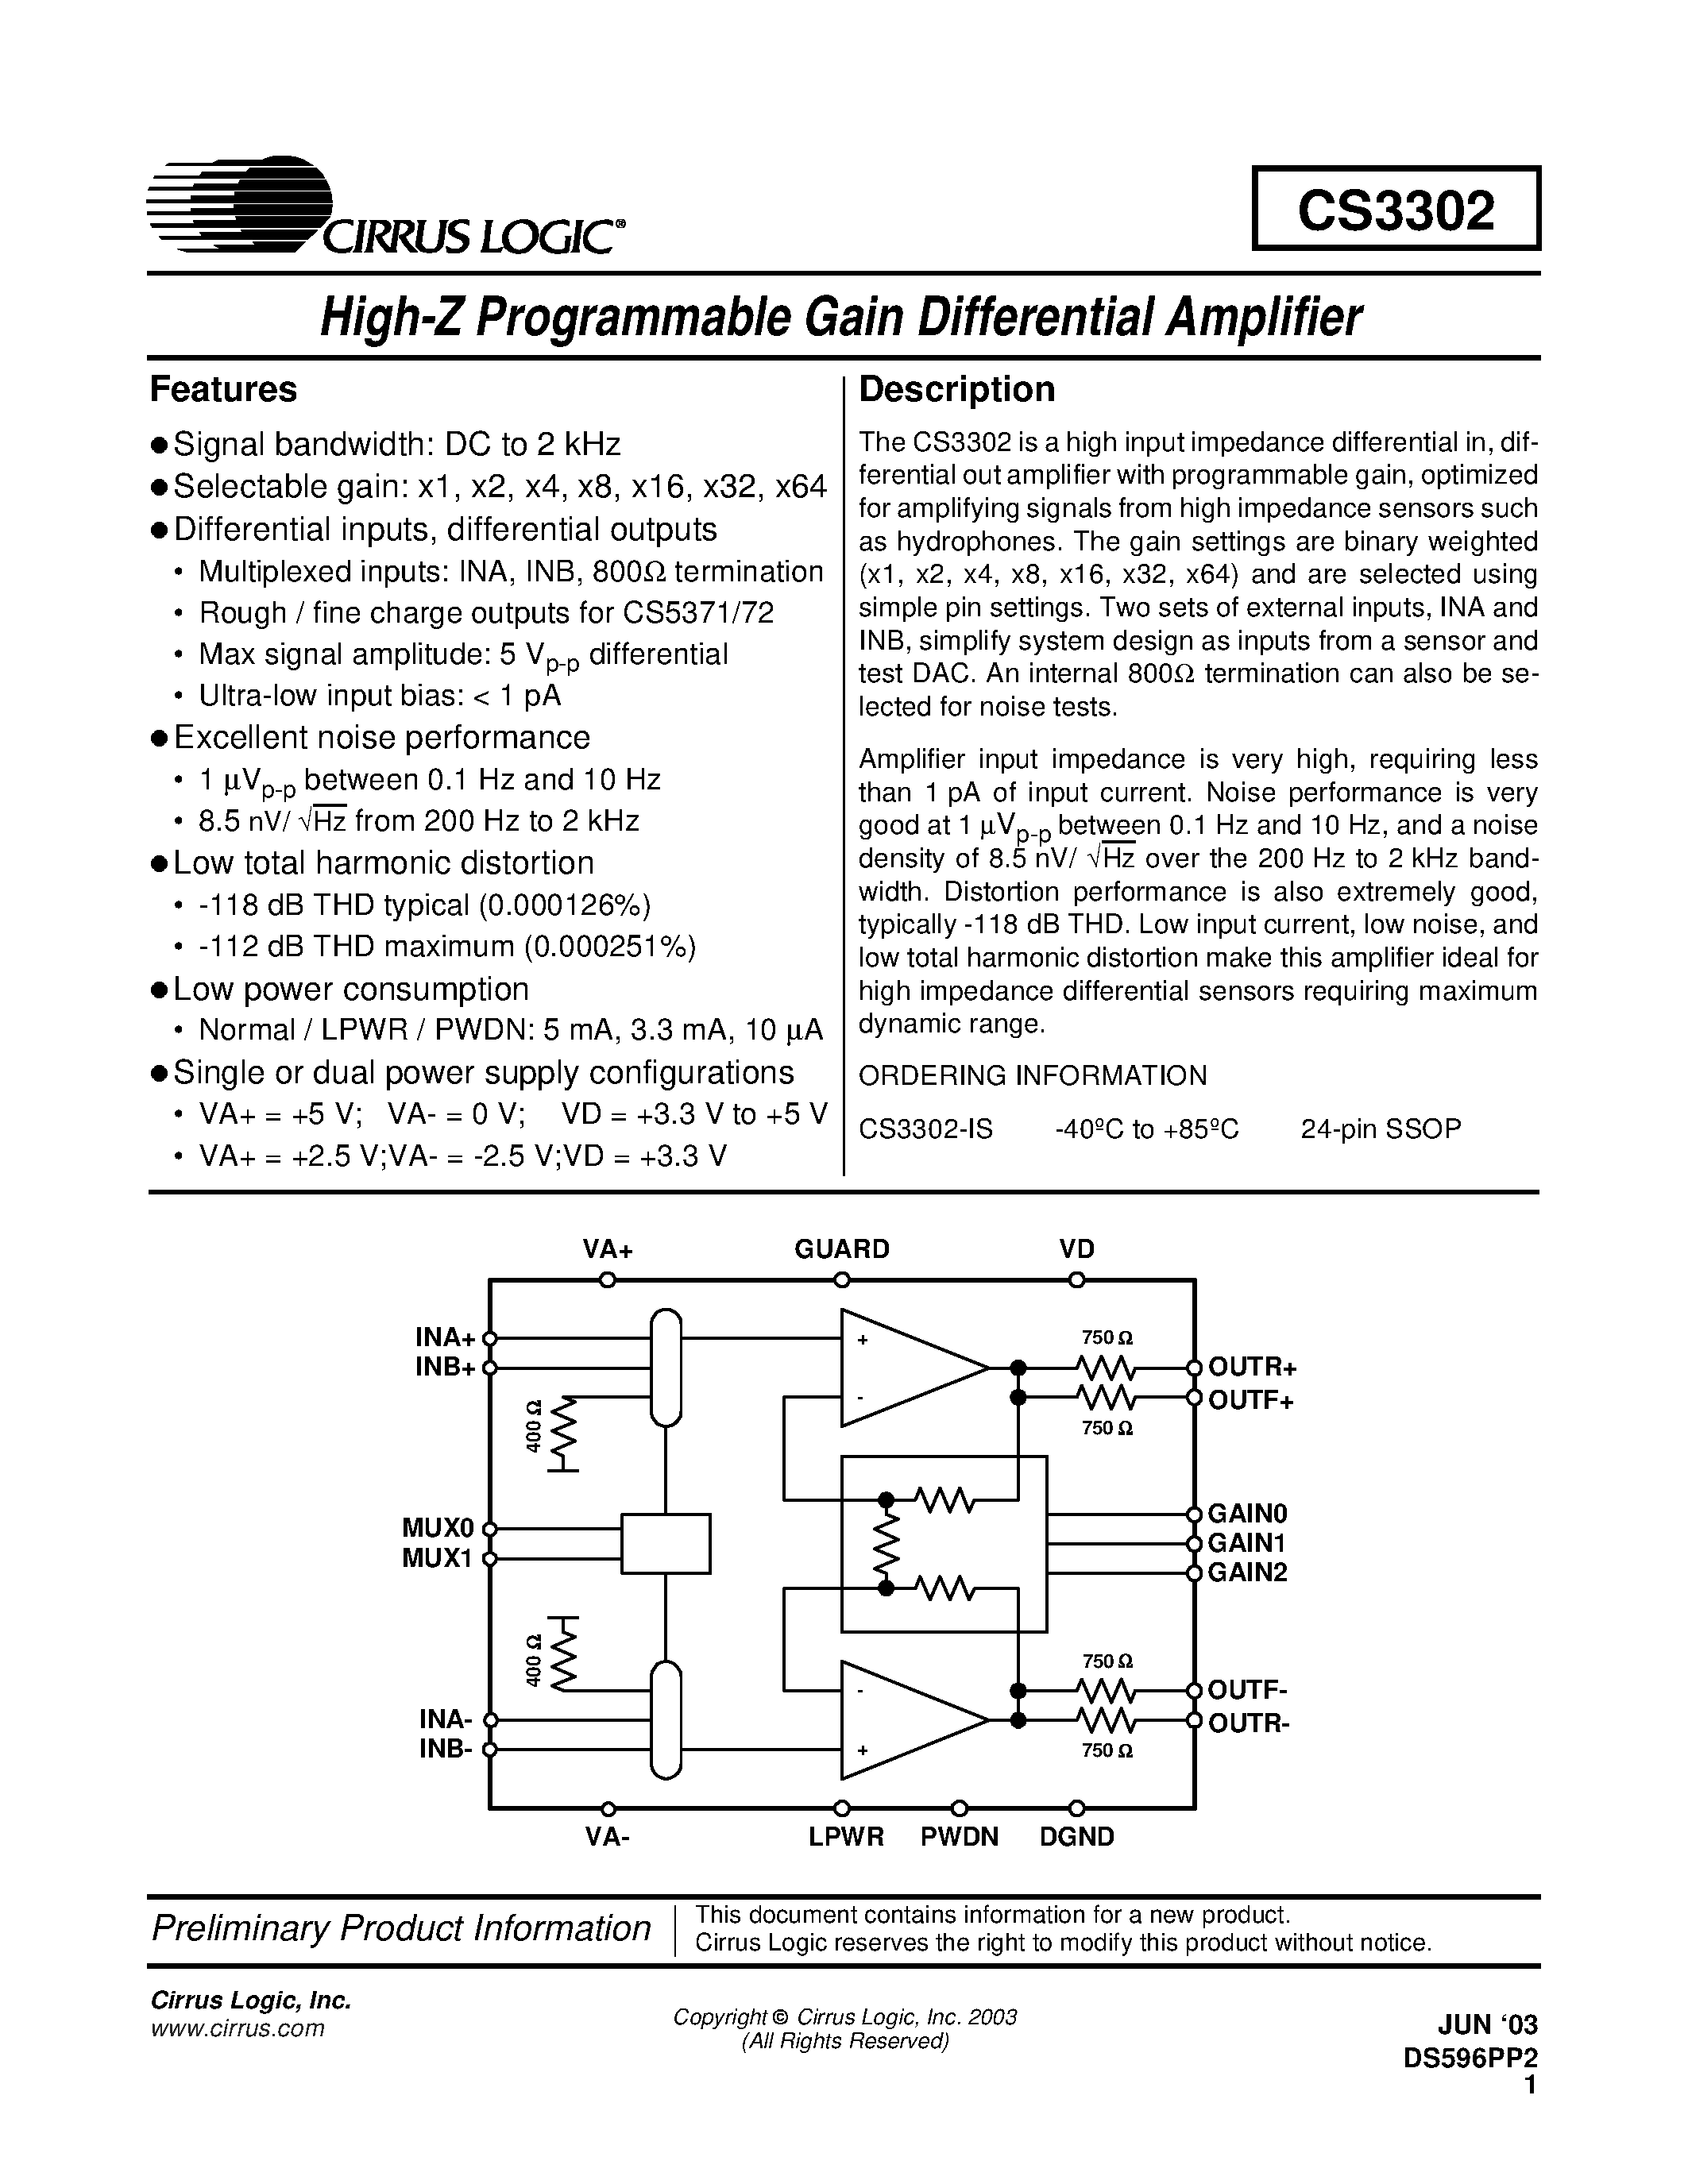 Даташит CS3302 - HIGH Z PROGRAMMABLE GAIN DIFFERENTIAL AMPLIFIER страница 1